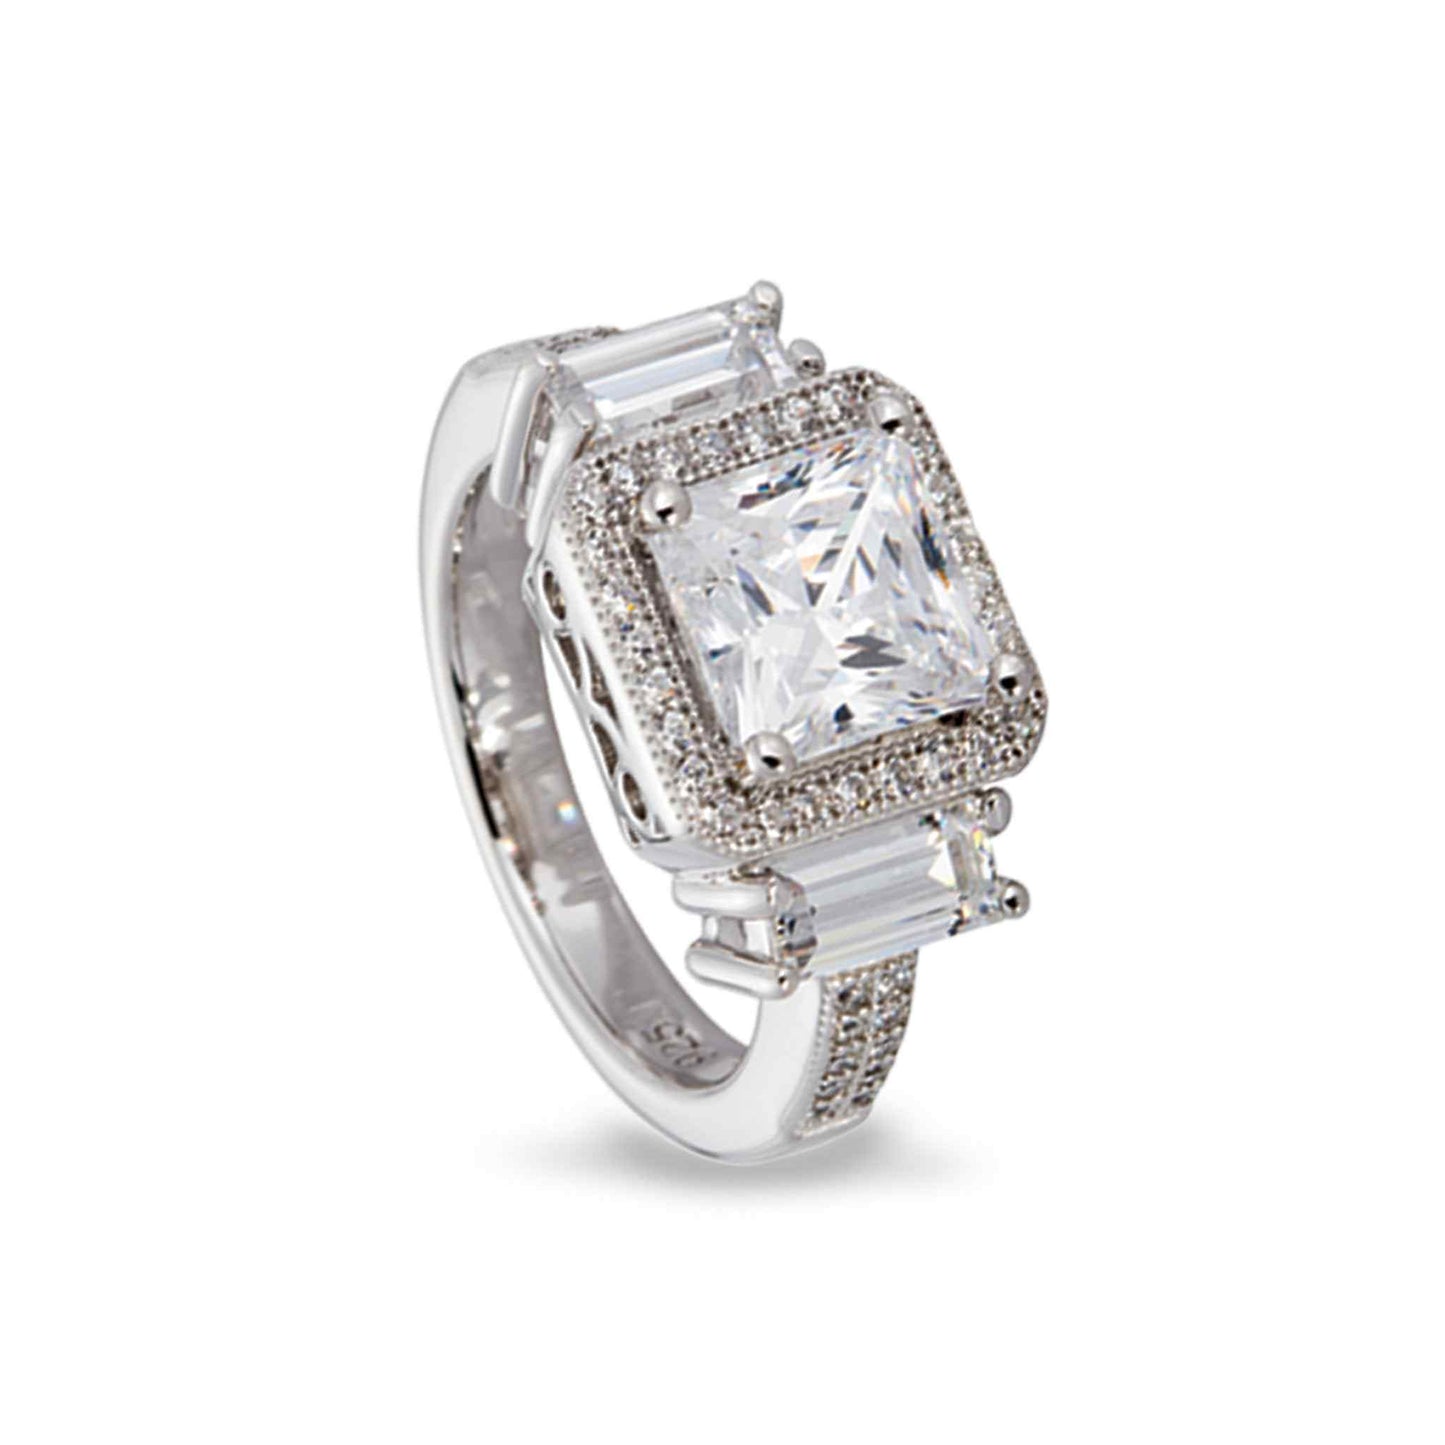 A sterling silver princess cut ring with 51 simulated diamonds displayed on a neutral white background.